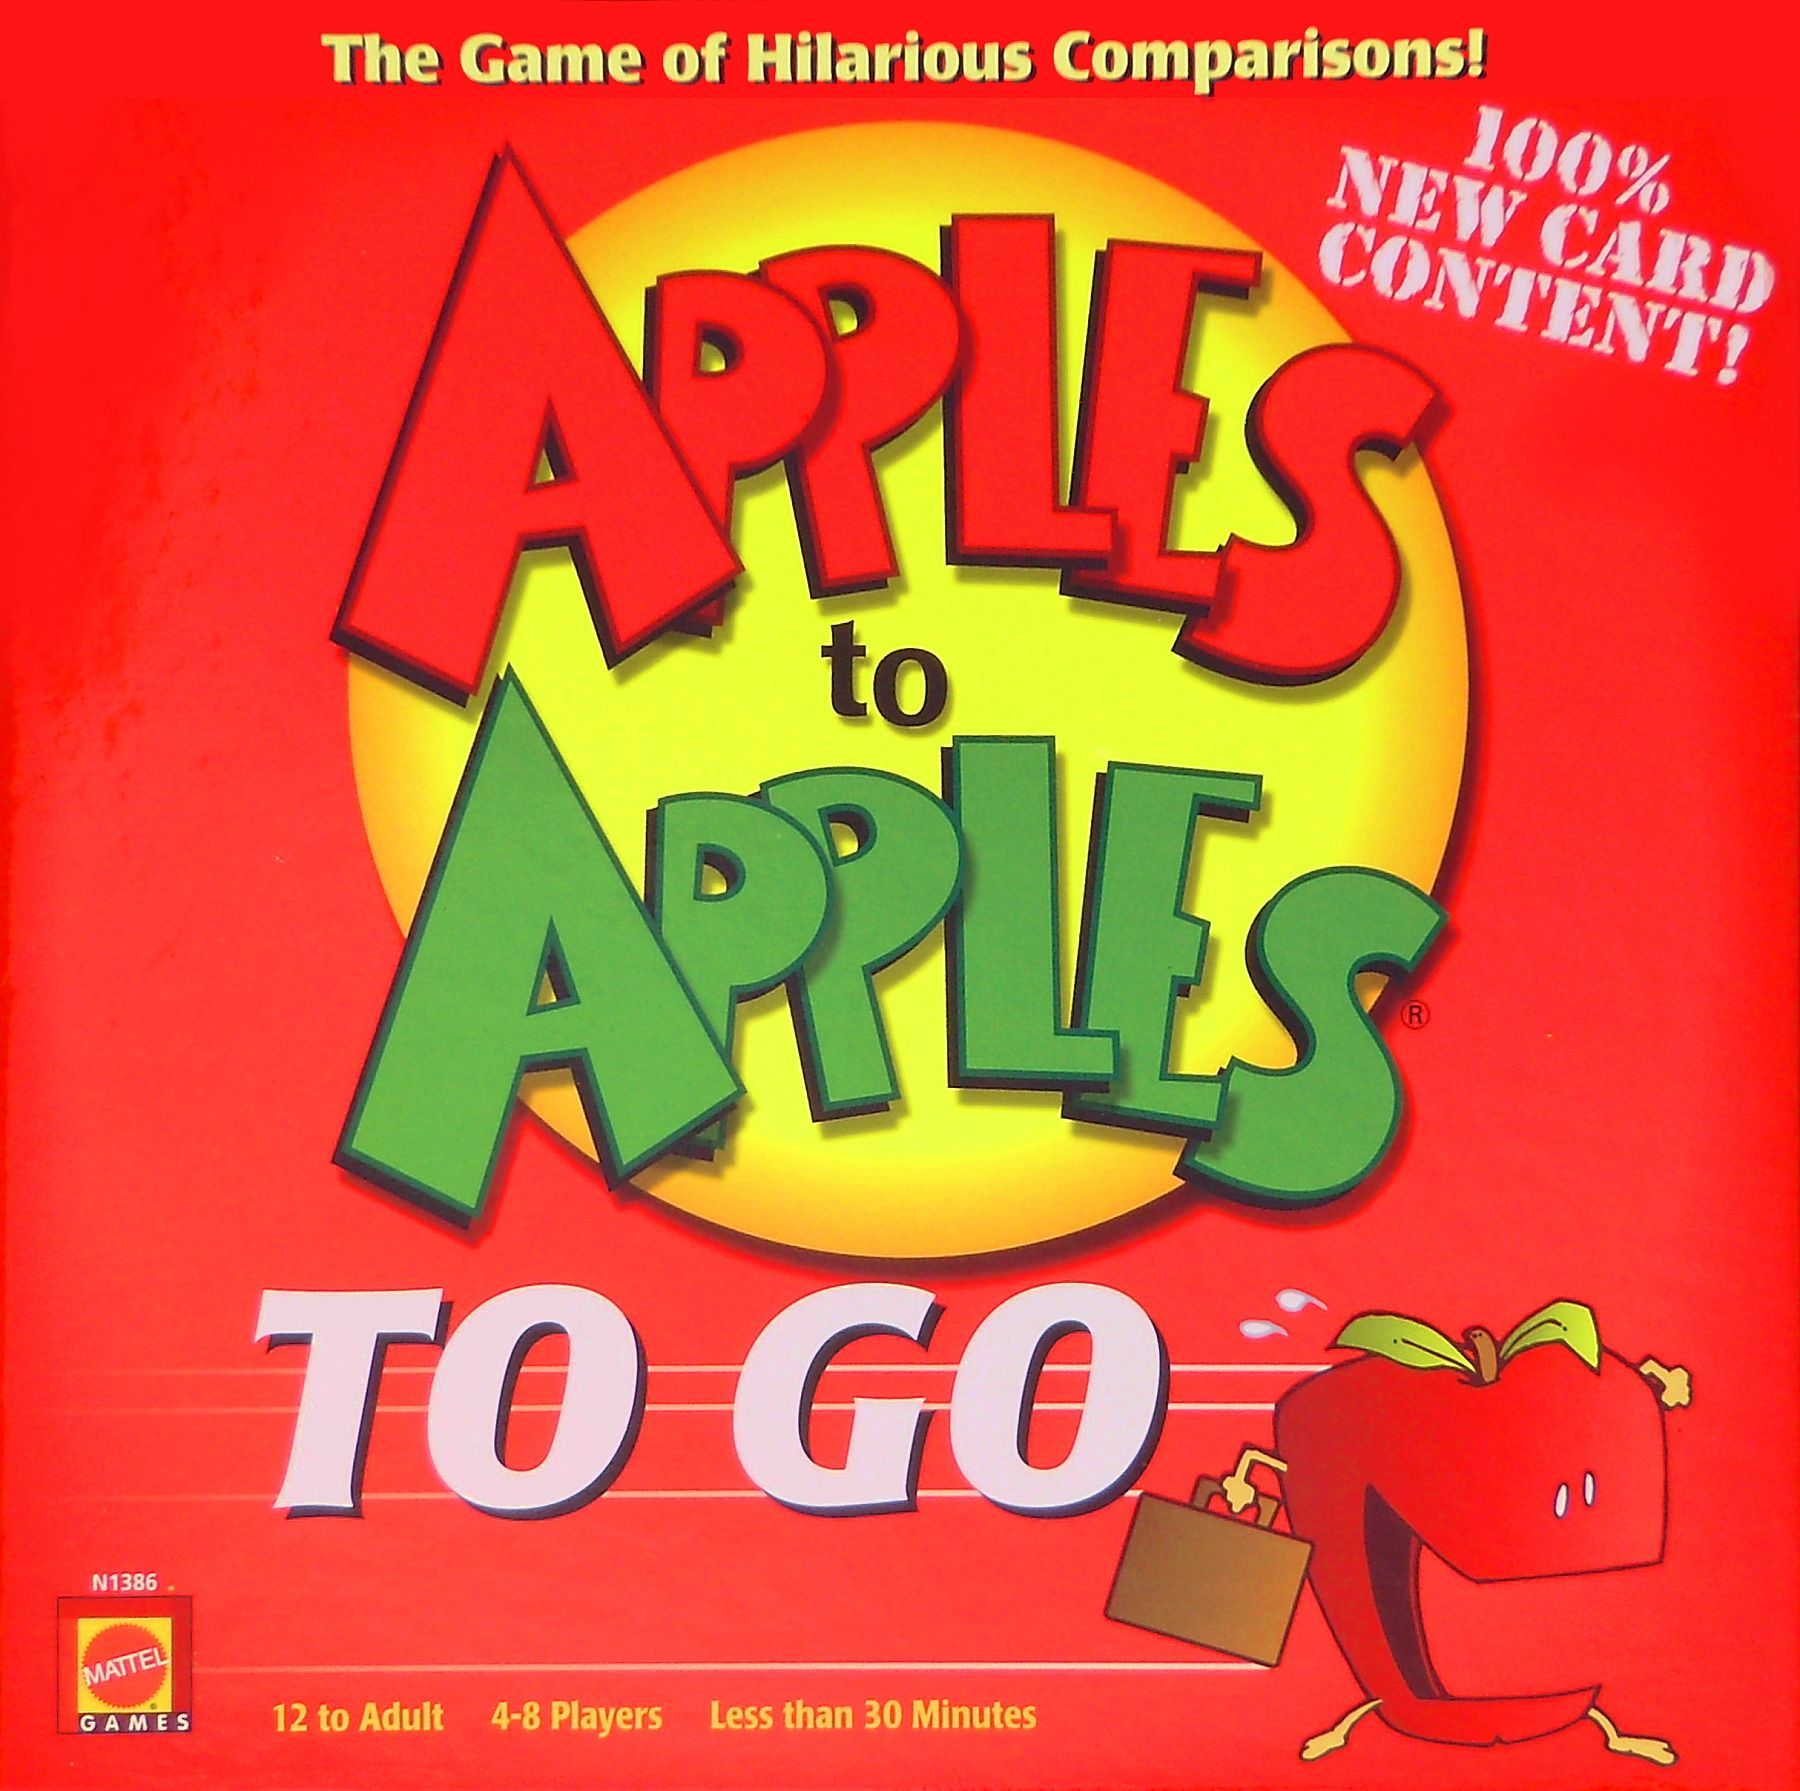 Apples to Apples to Go